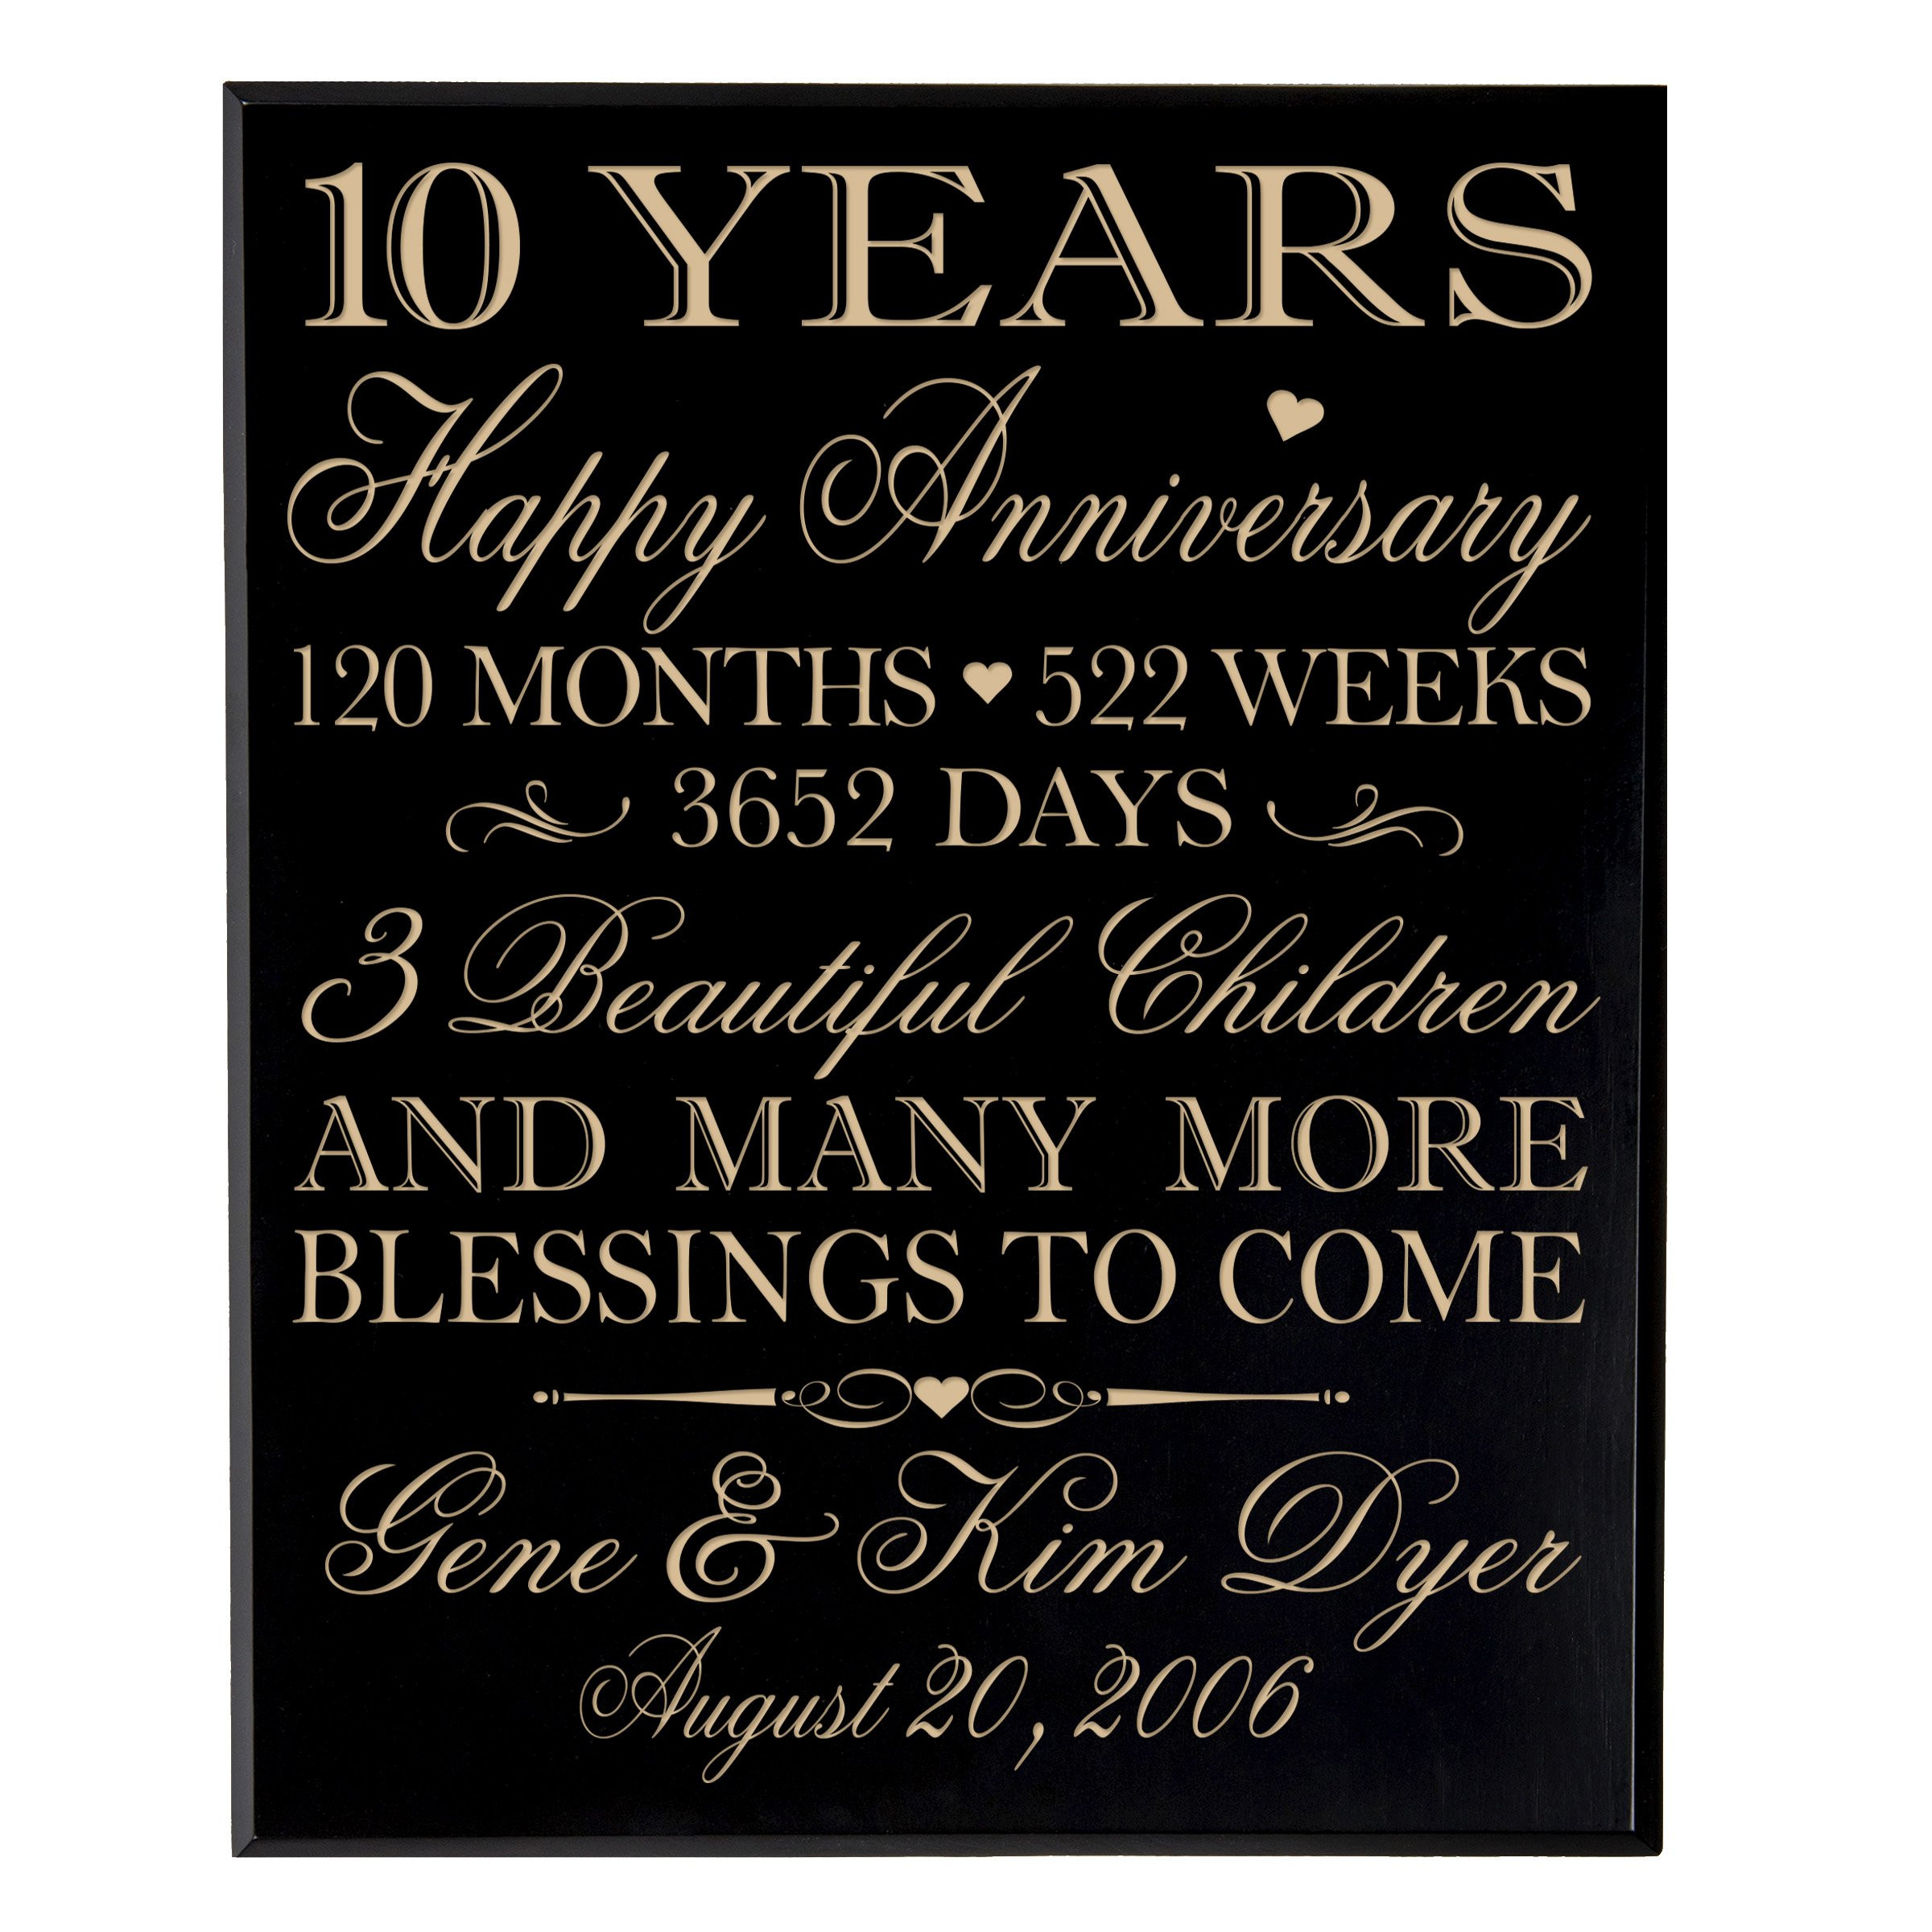 10 Year Anniversary Gift Ideas For Couple
 Buy Personalized 10 year Anniversary wedding Gifts Ideas